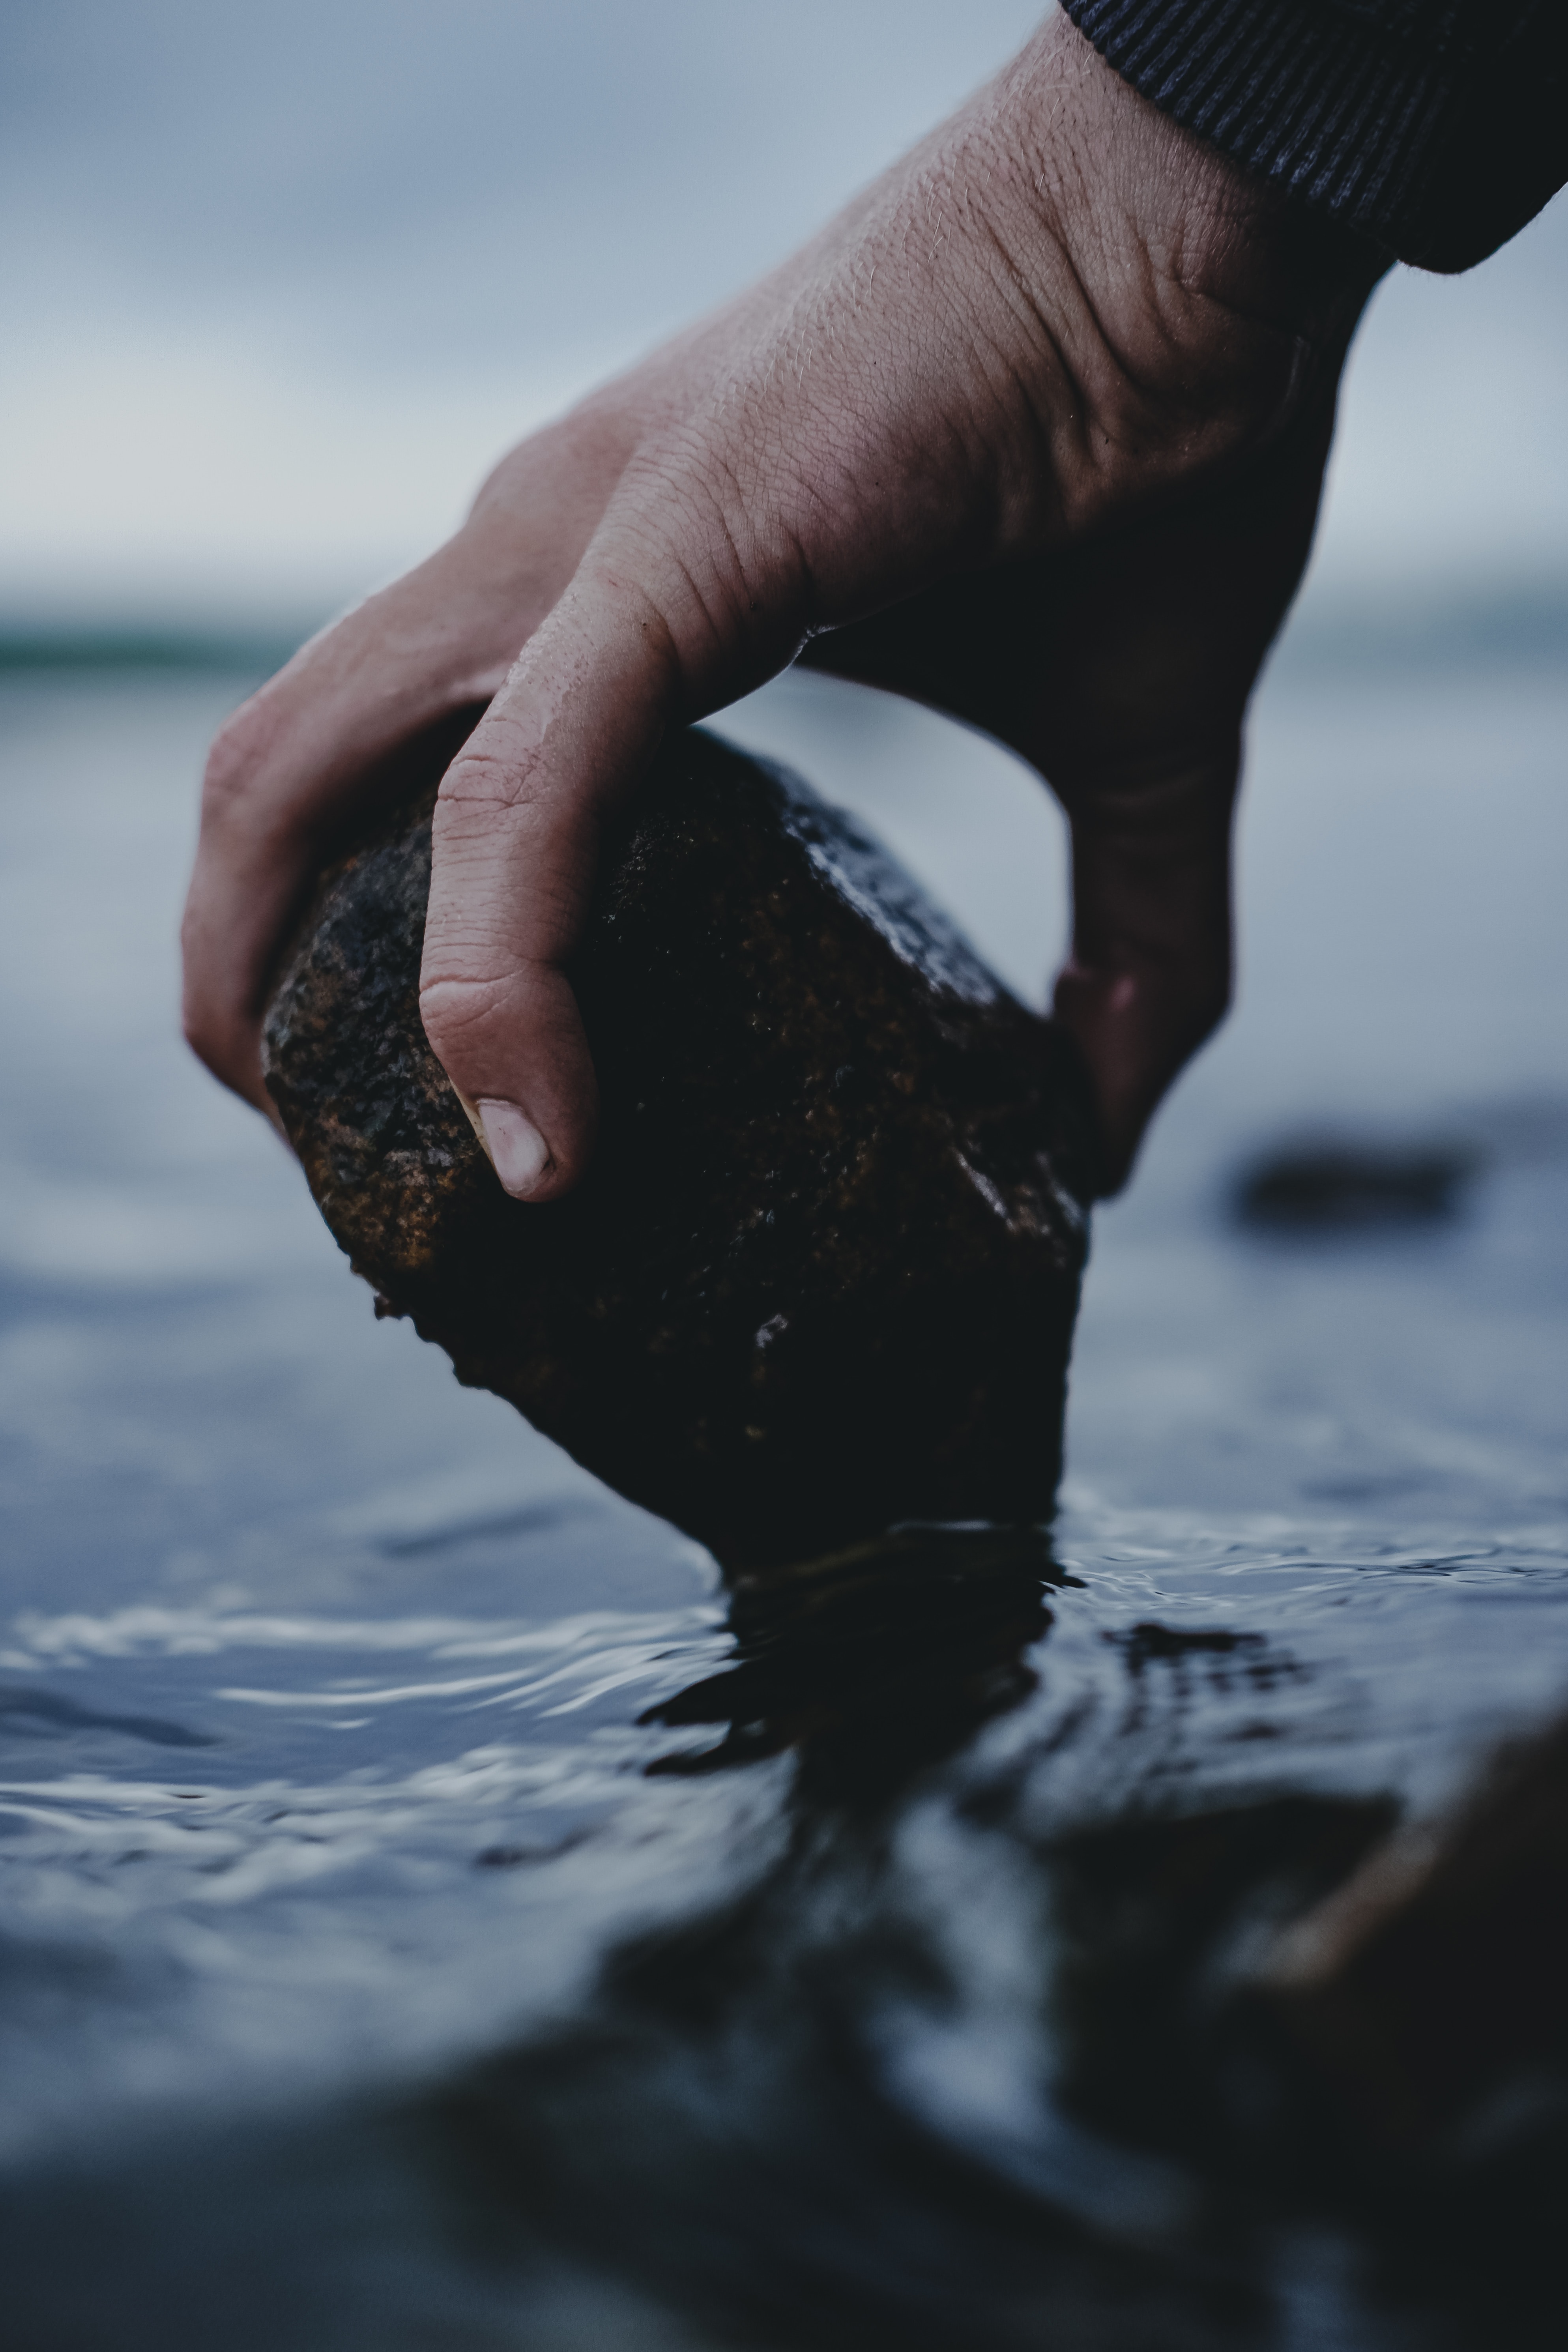 wallpapers miscellaneous, water, rock, hand, miscellanea, wet, stone